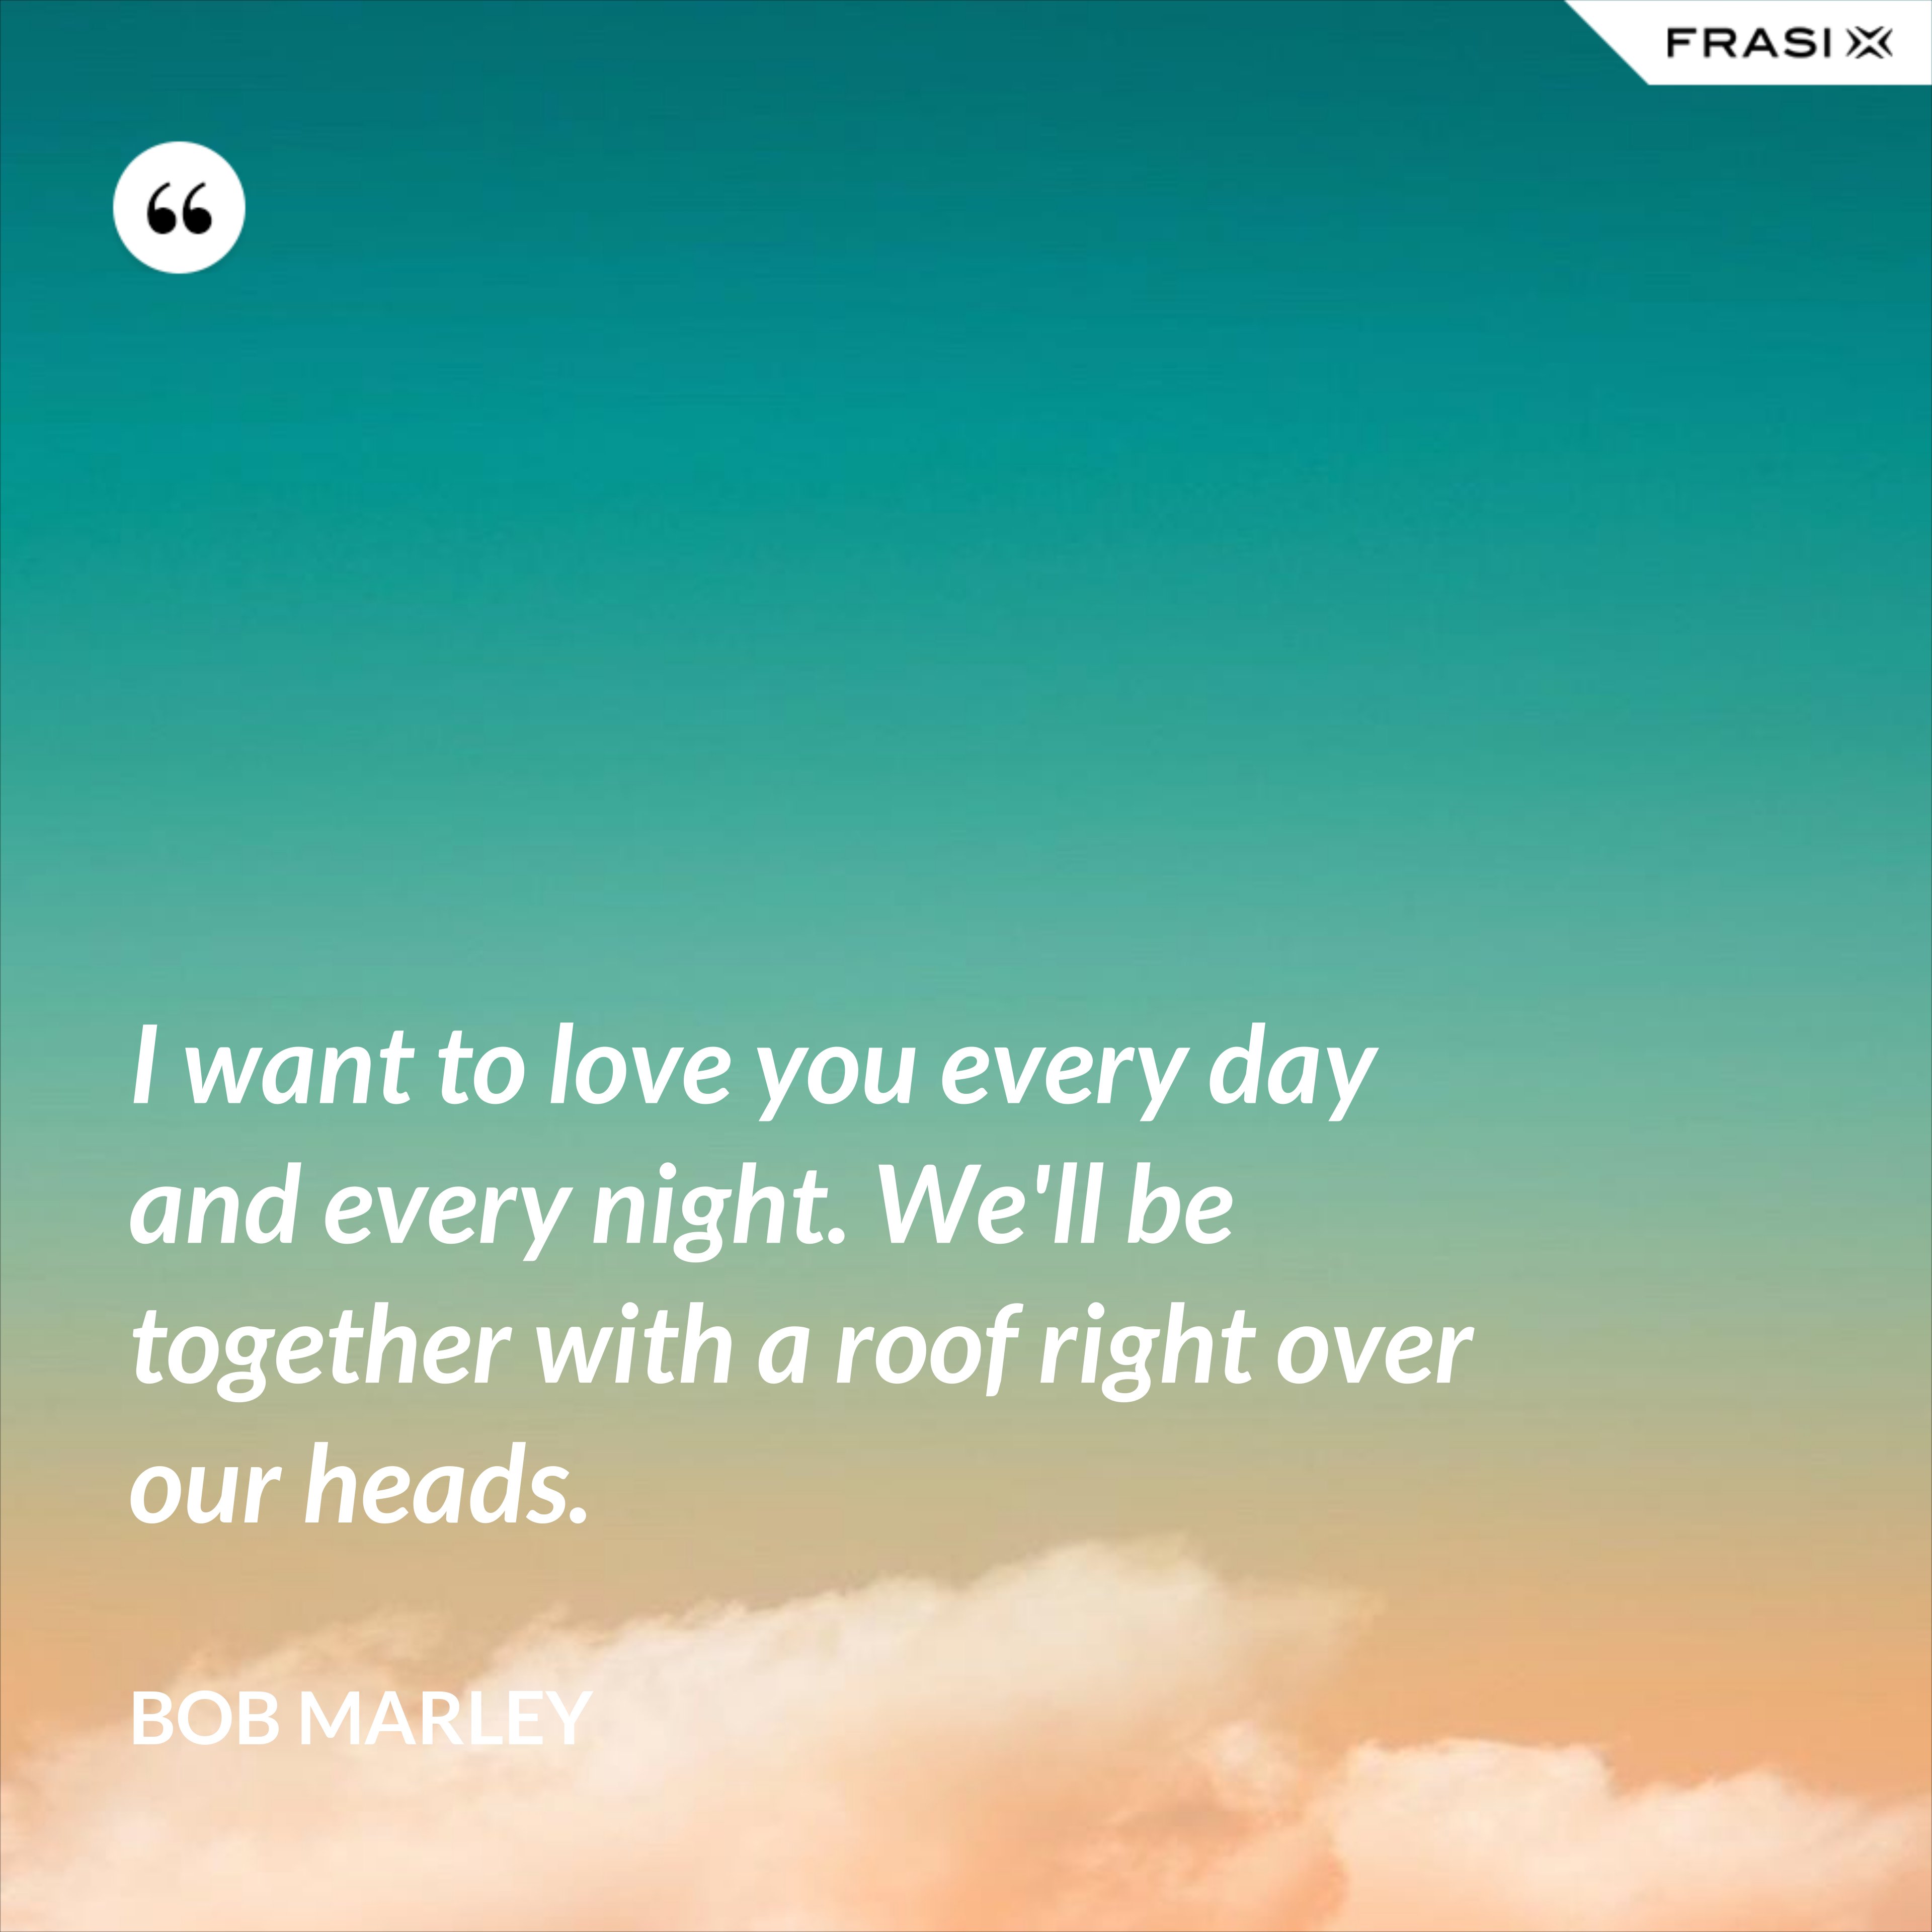 I want to love you every day and every night. We'll be together with a roof right over our heads. - Bob Marley